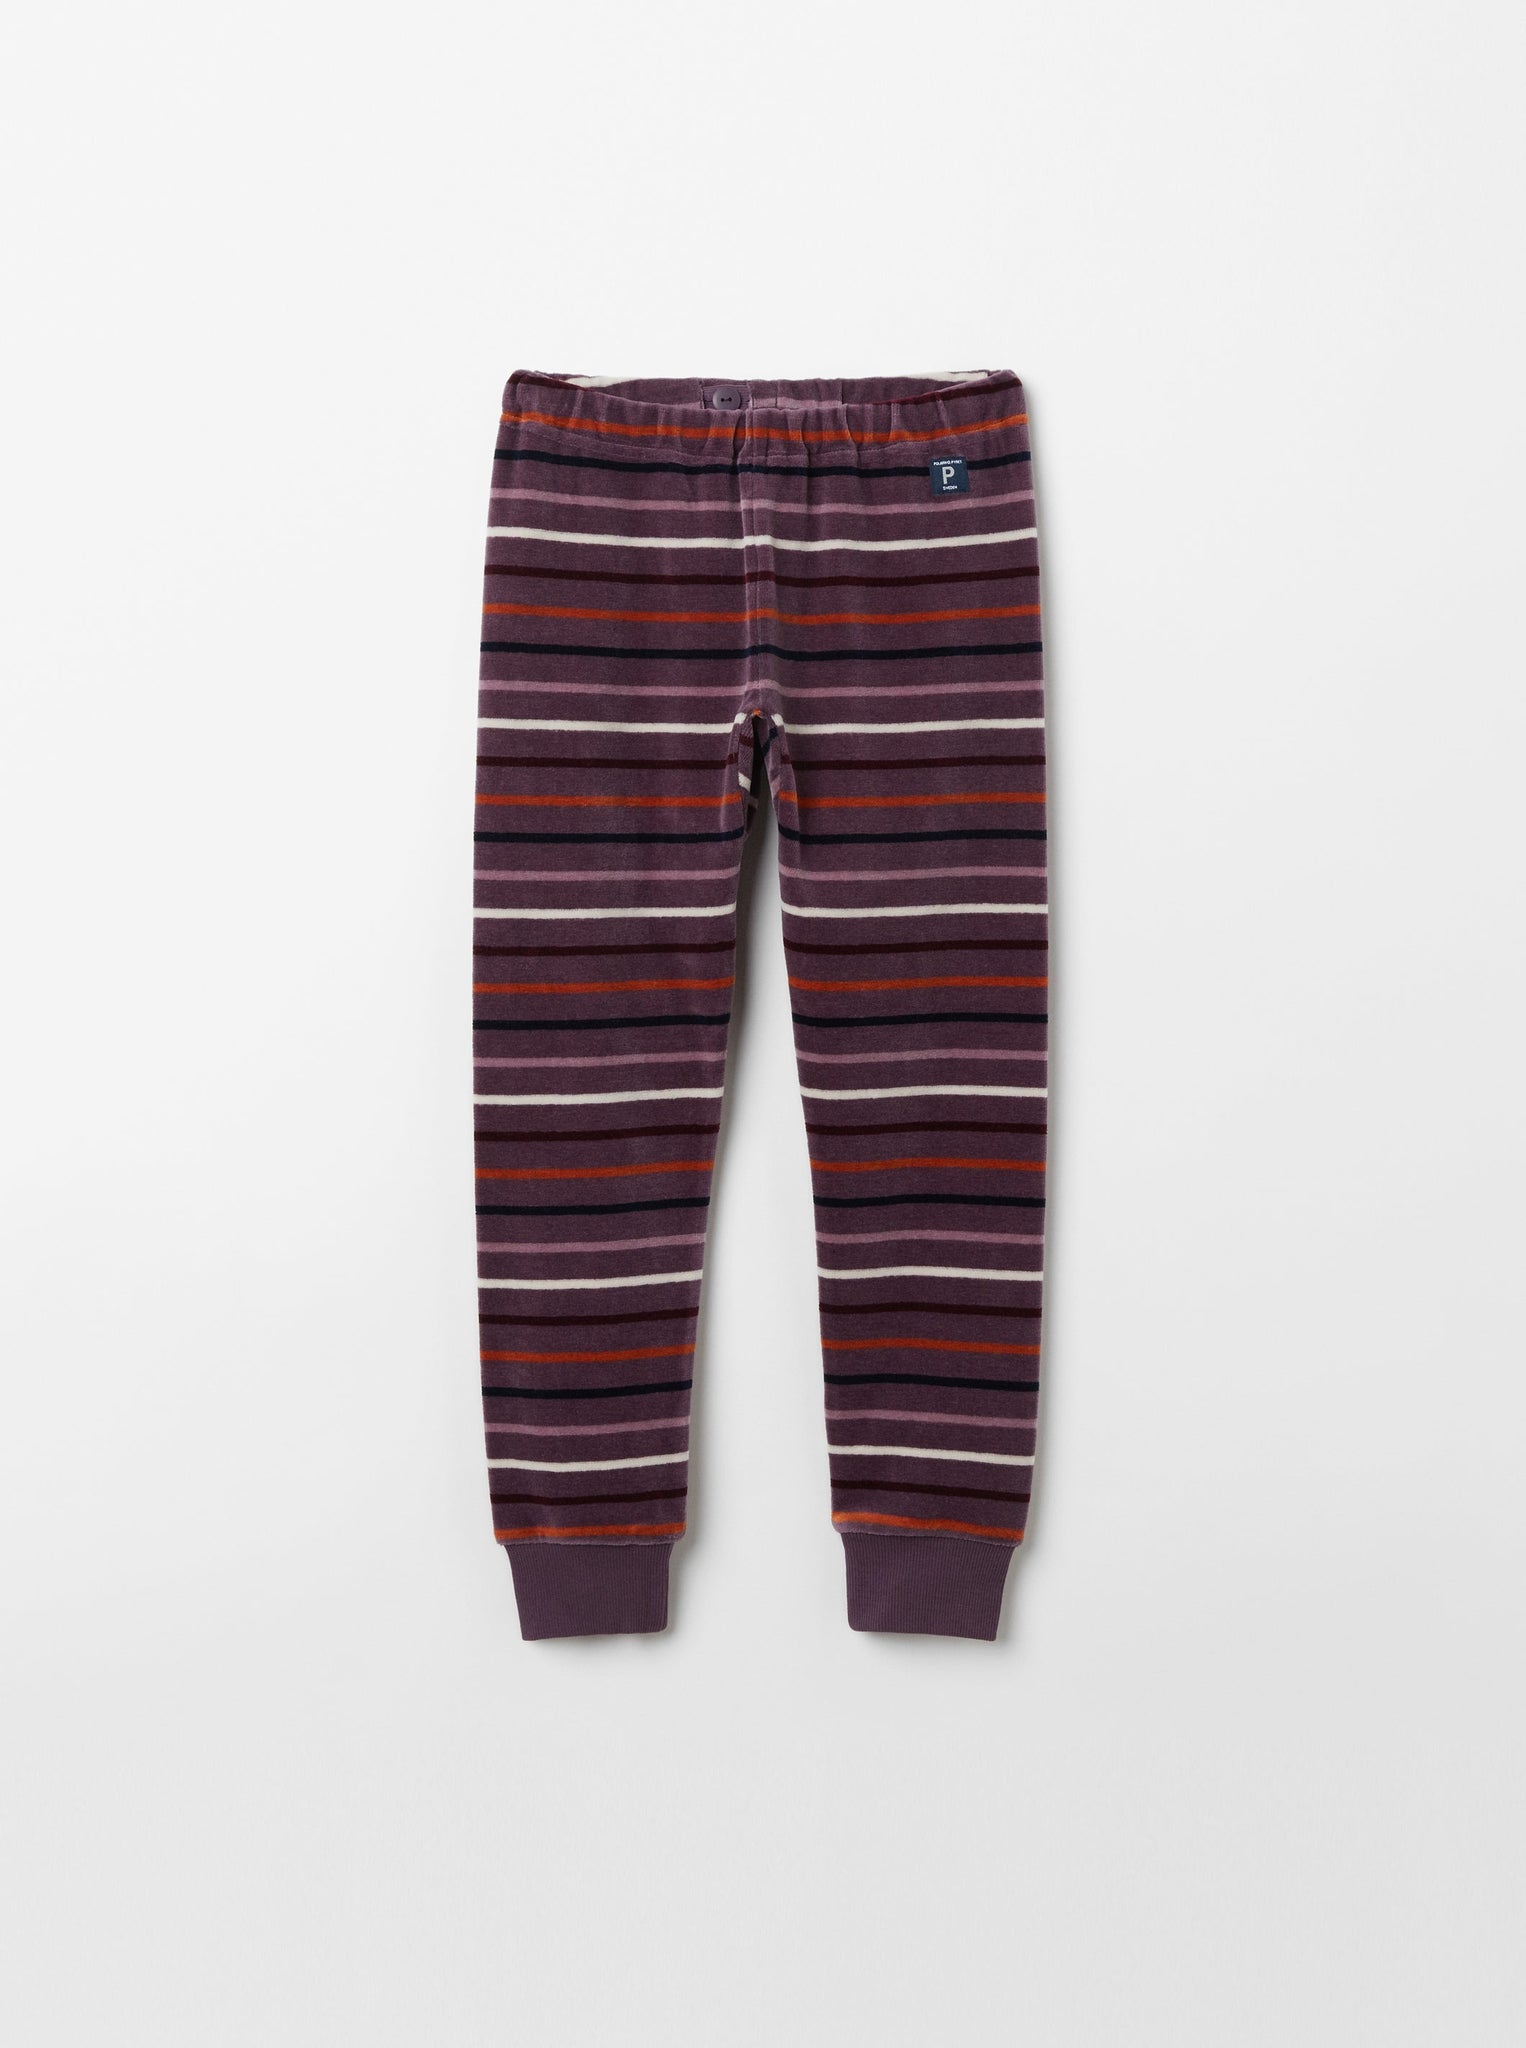 Striped Purple Velour Kids Leggings from the Polarn O. Pyret kidswear collection. Ethically produced kids clothing.